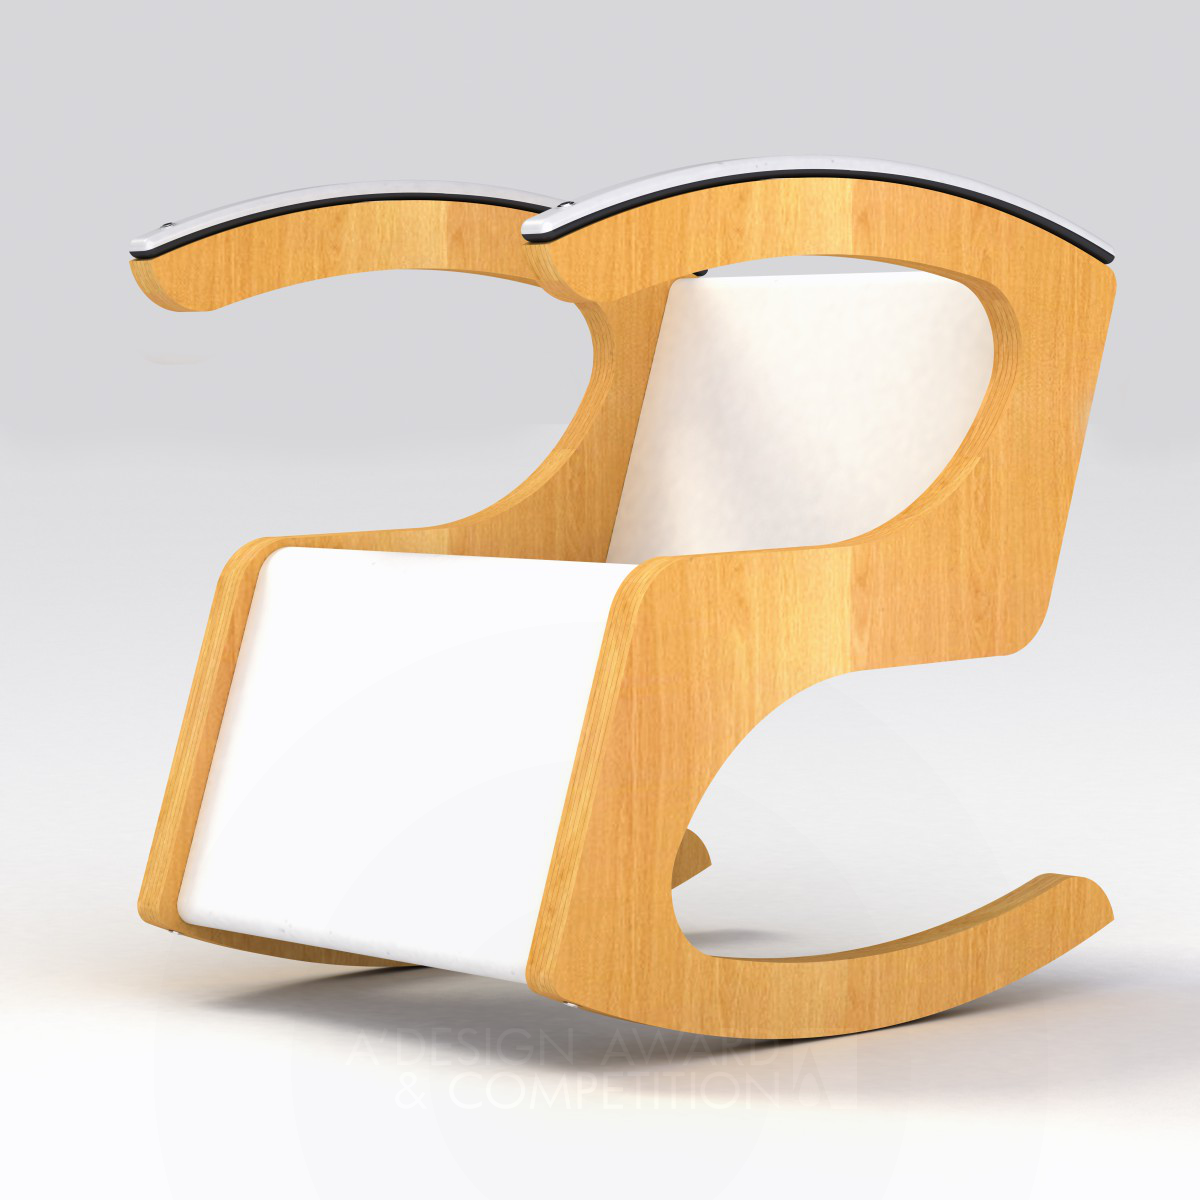 ESE Rocking Chair by Claudio Sibille